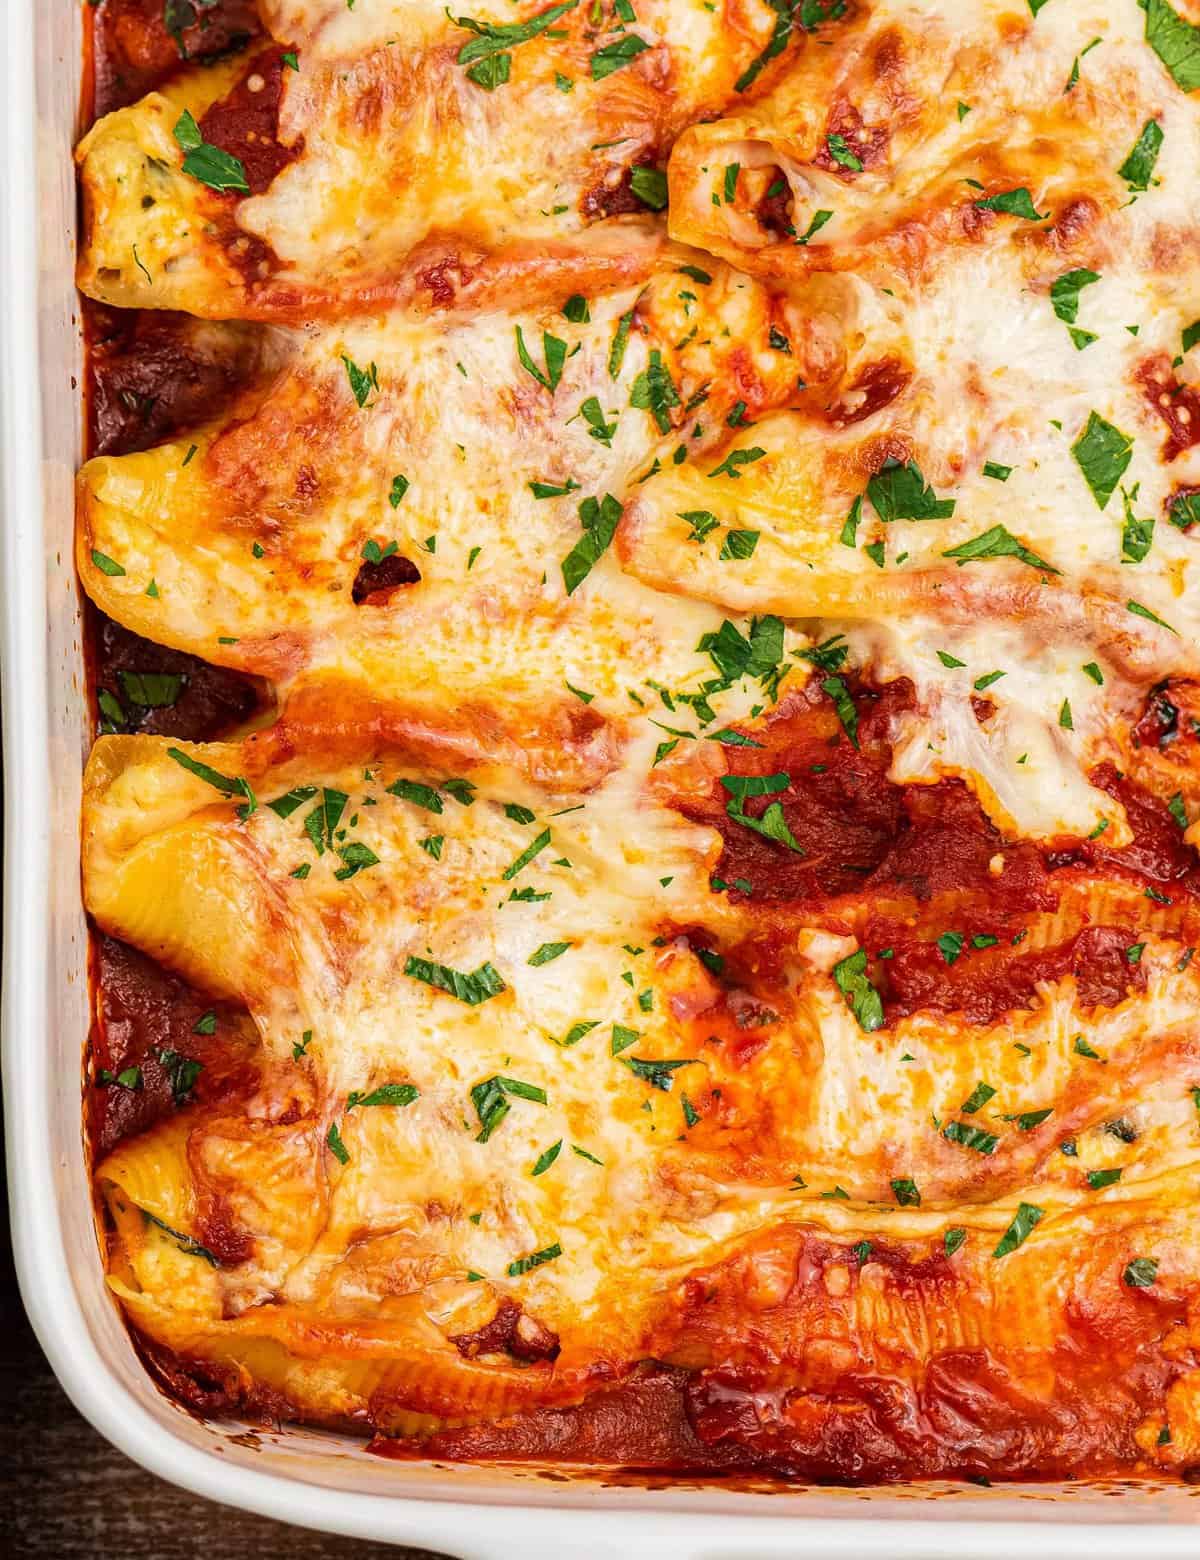 Pasta shells are stuffed with a cheesy ricotta, spinach and garlic filling, then smothered in marinara sauce and mozzarella cheese and baked until bubbly and golden brown! Perfect as a make-ahead dinner idea, and it's freezer-friendly as well.